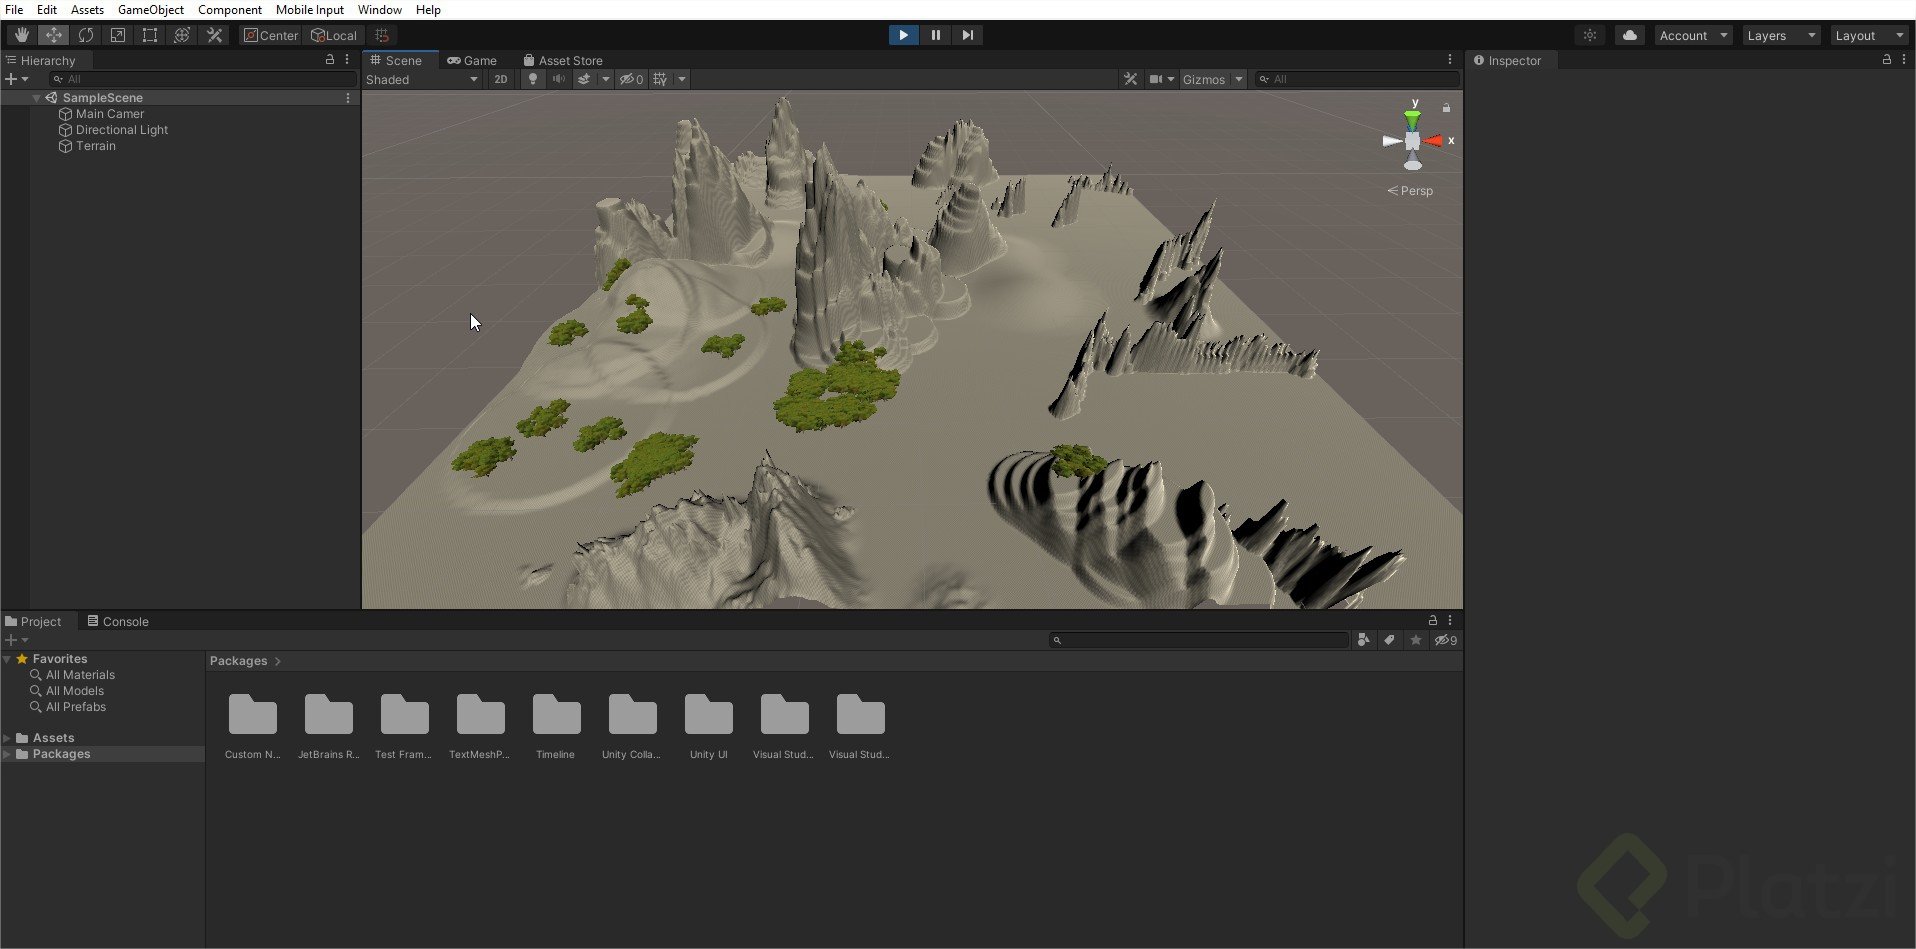 New Unity Project - SampleScene - PC, Mac & Linux Standalone - Unity 2020.1.8f1 Personal DX11.jpg